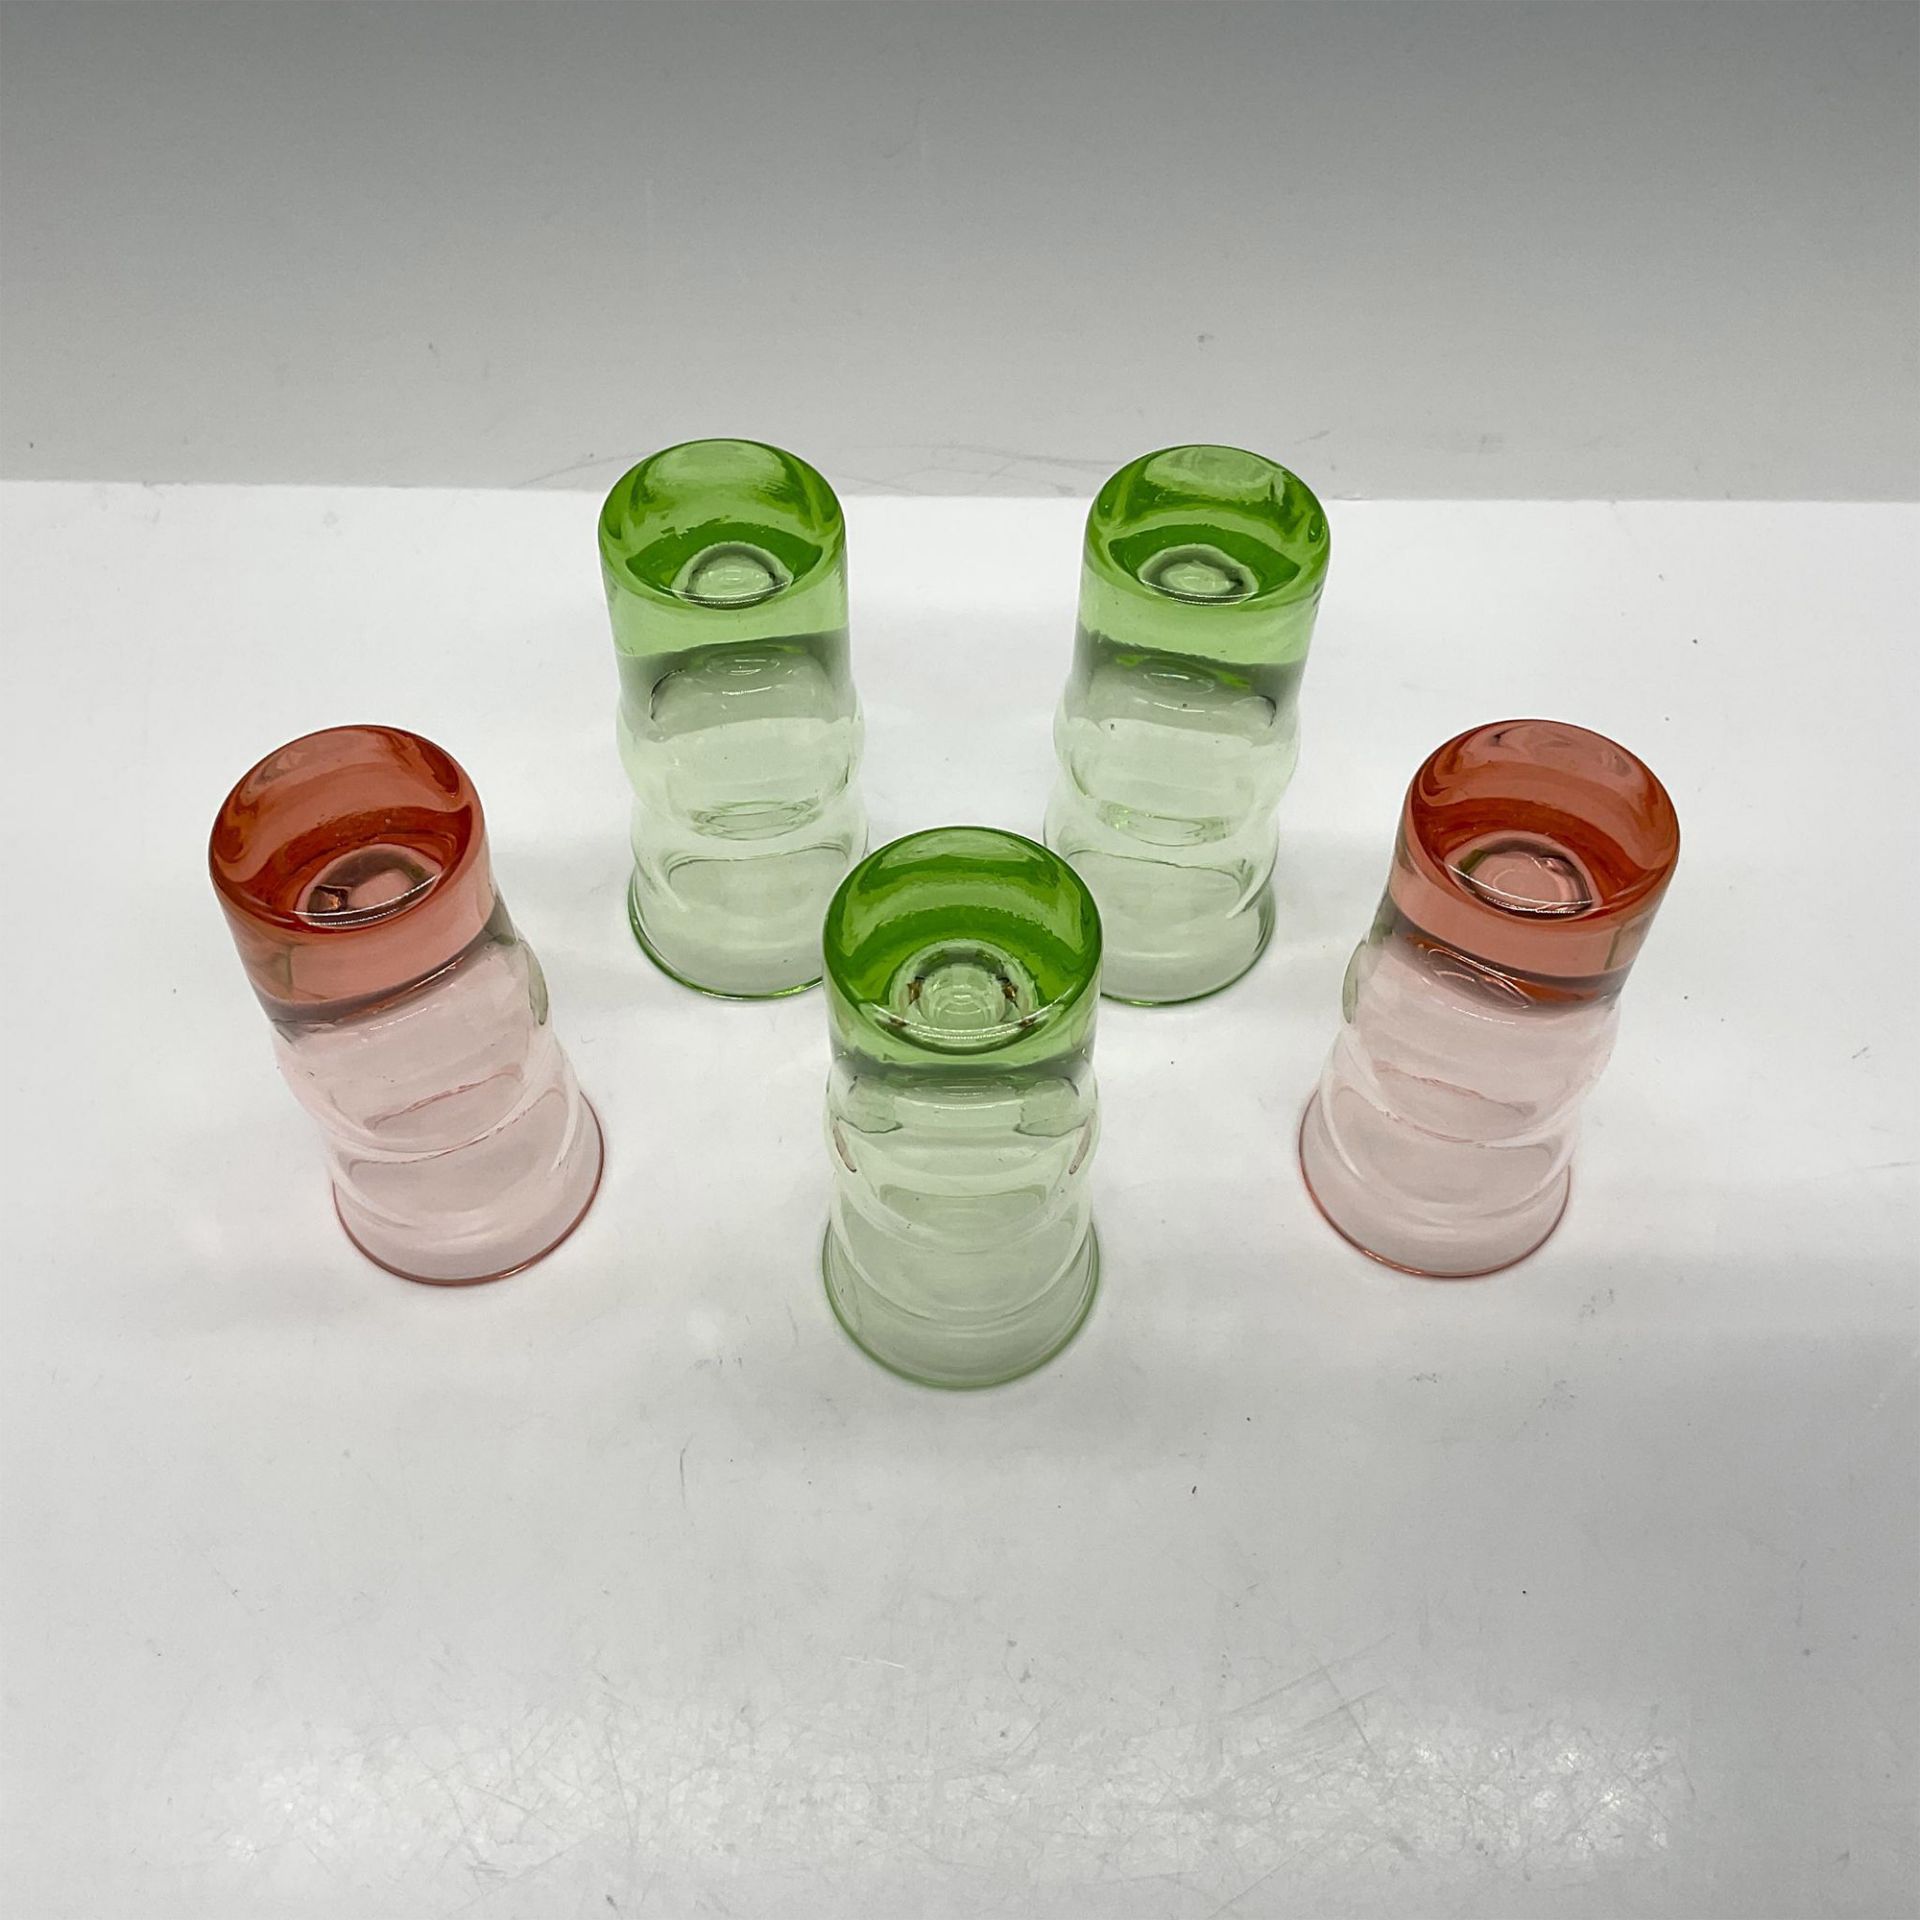 5pc Vintage Art Deco Style Colored Shot Glasses - Image 3 of 3